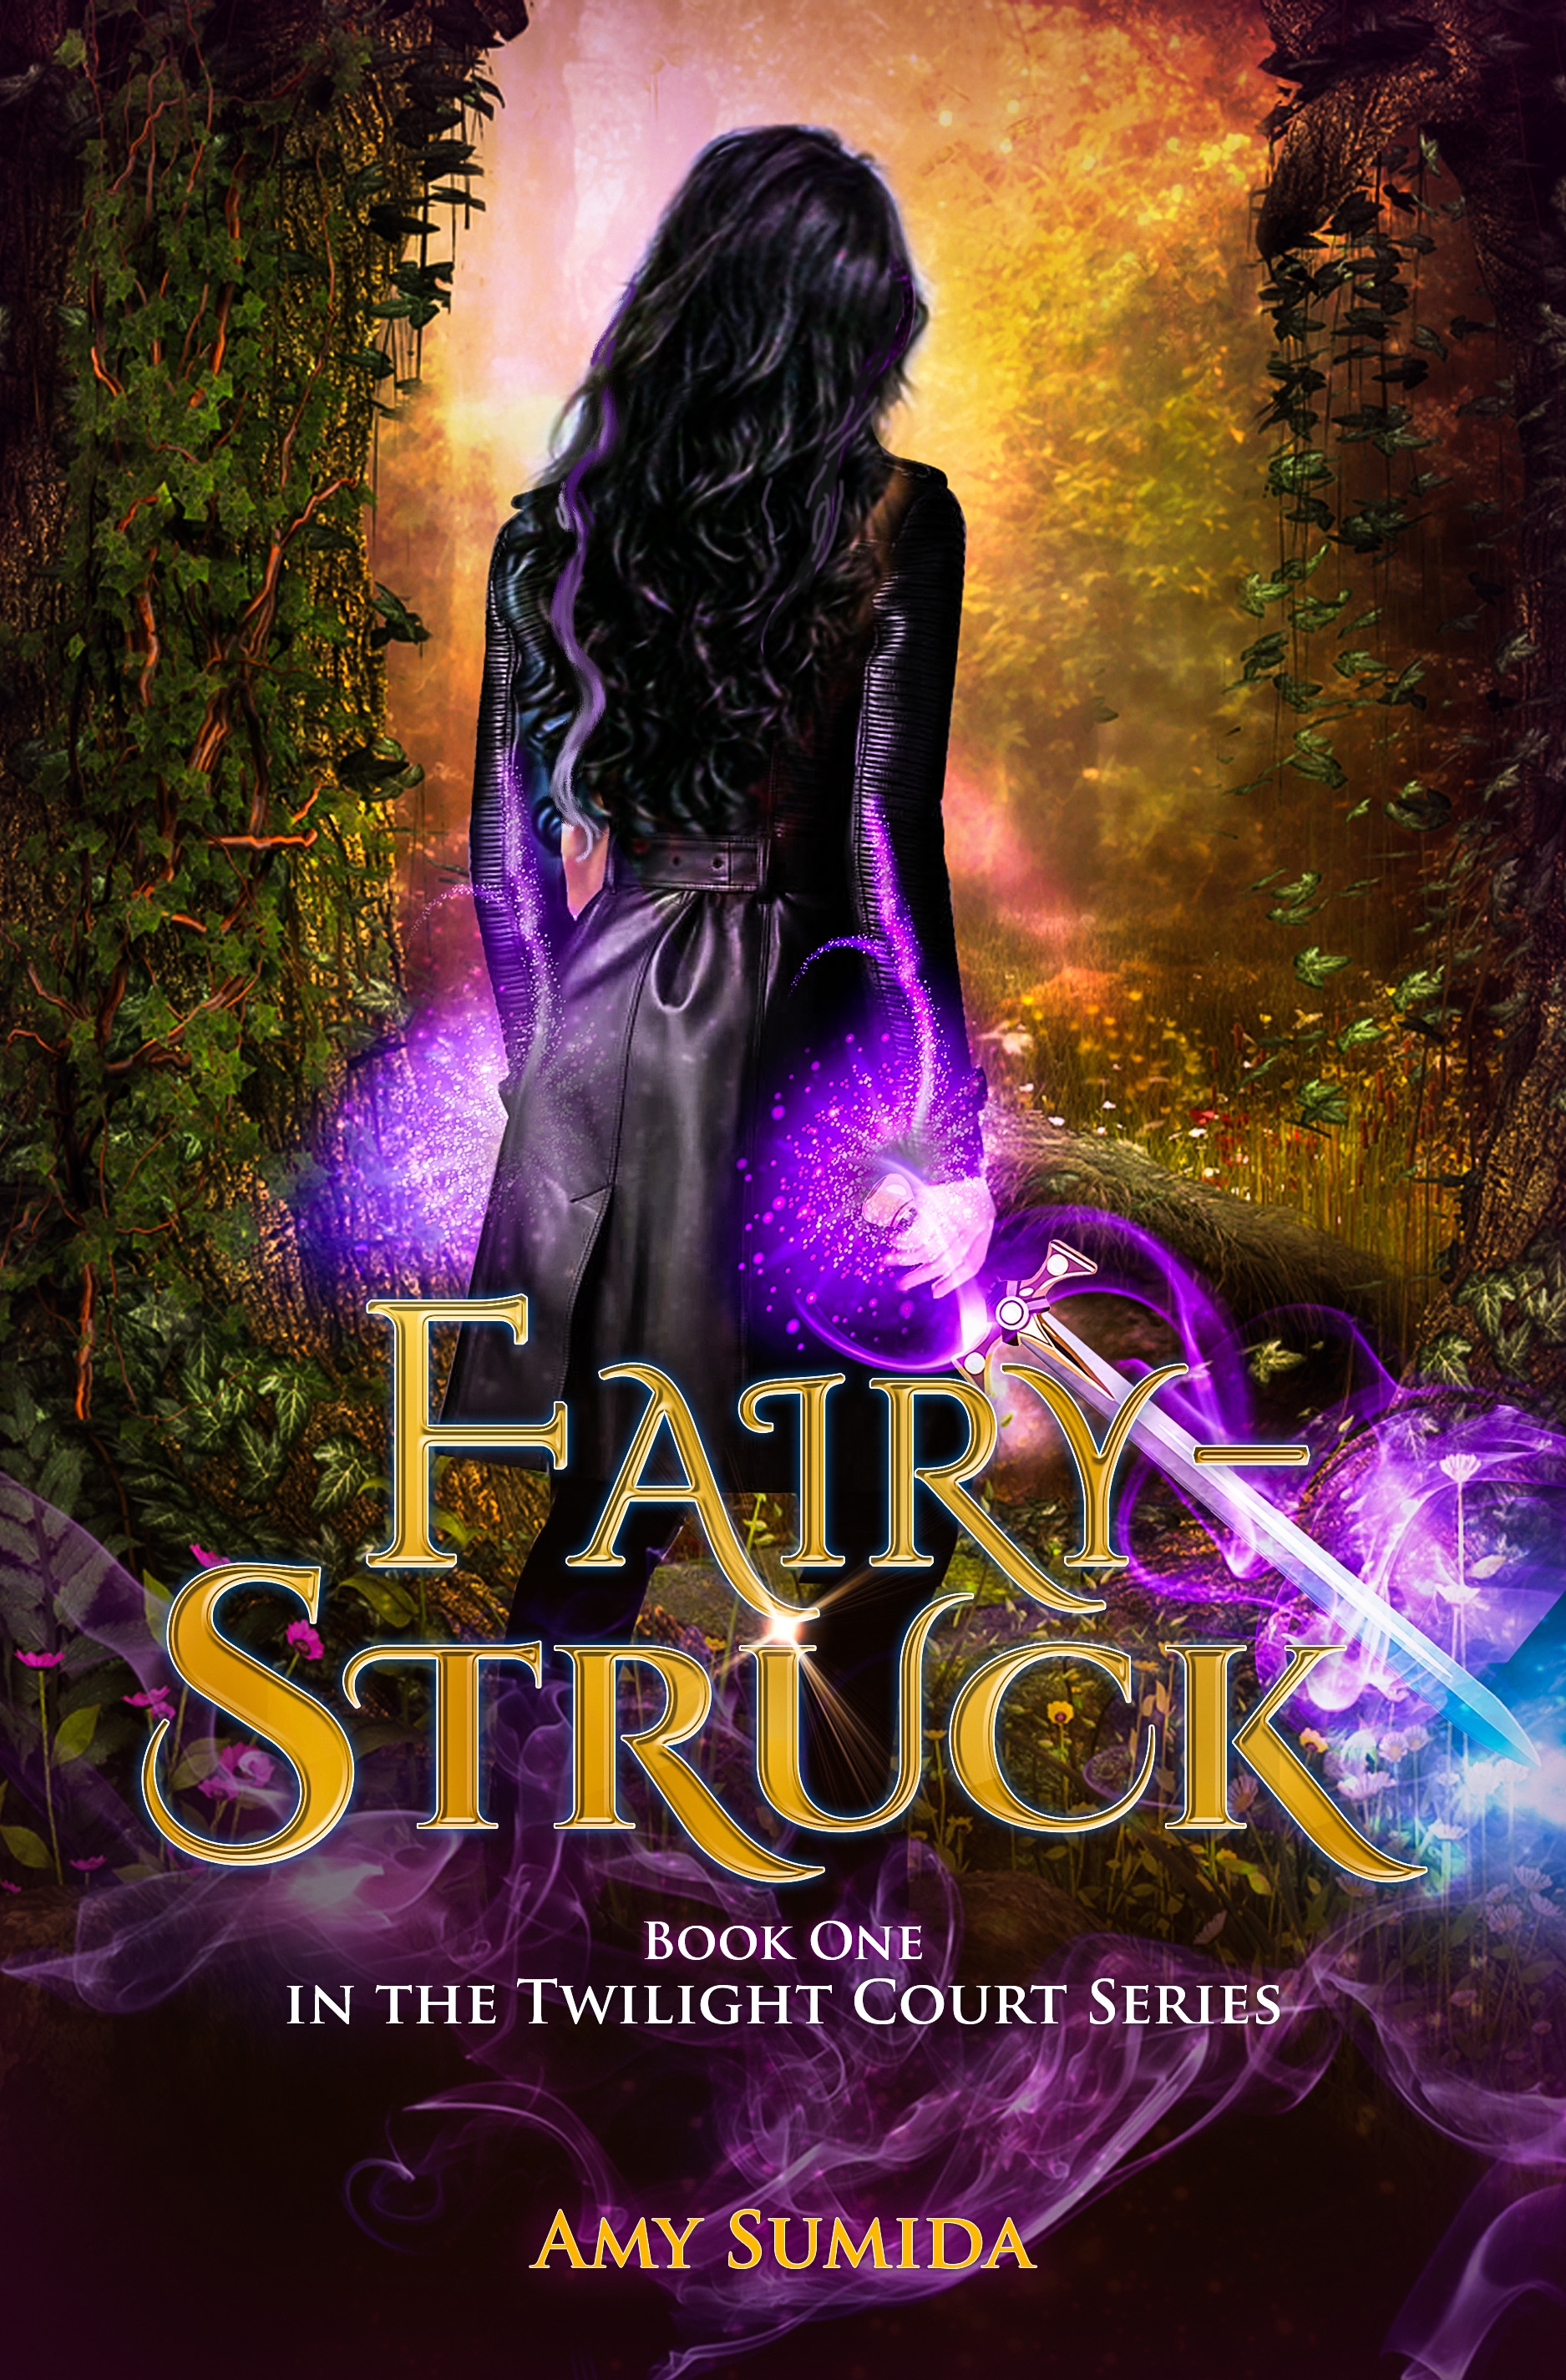 Fairy-Struck - Book One in the Twilight Court Series book cover shows fairy with sword.